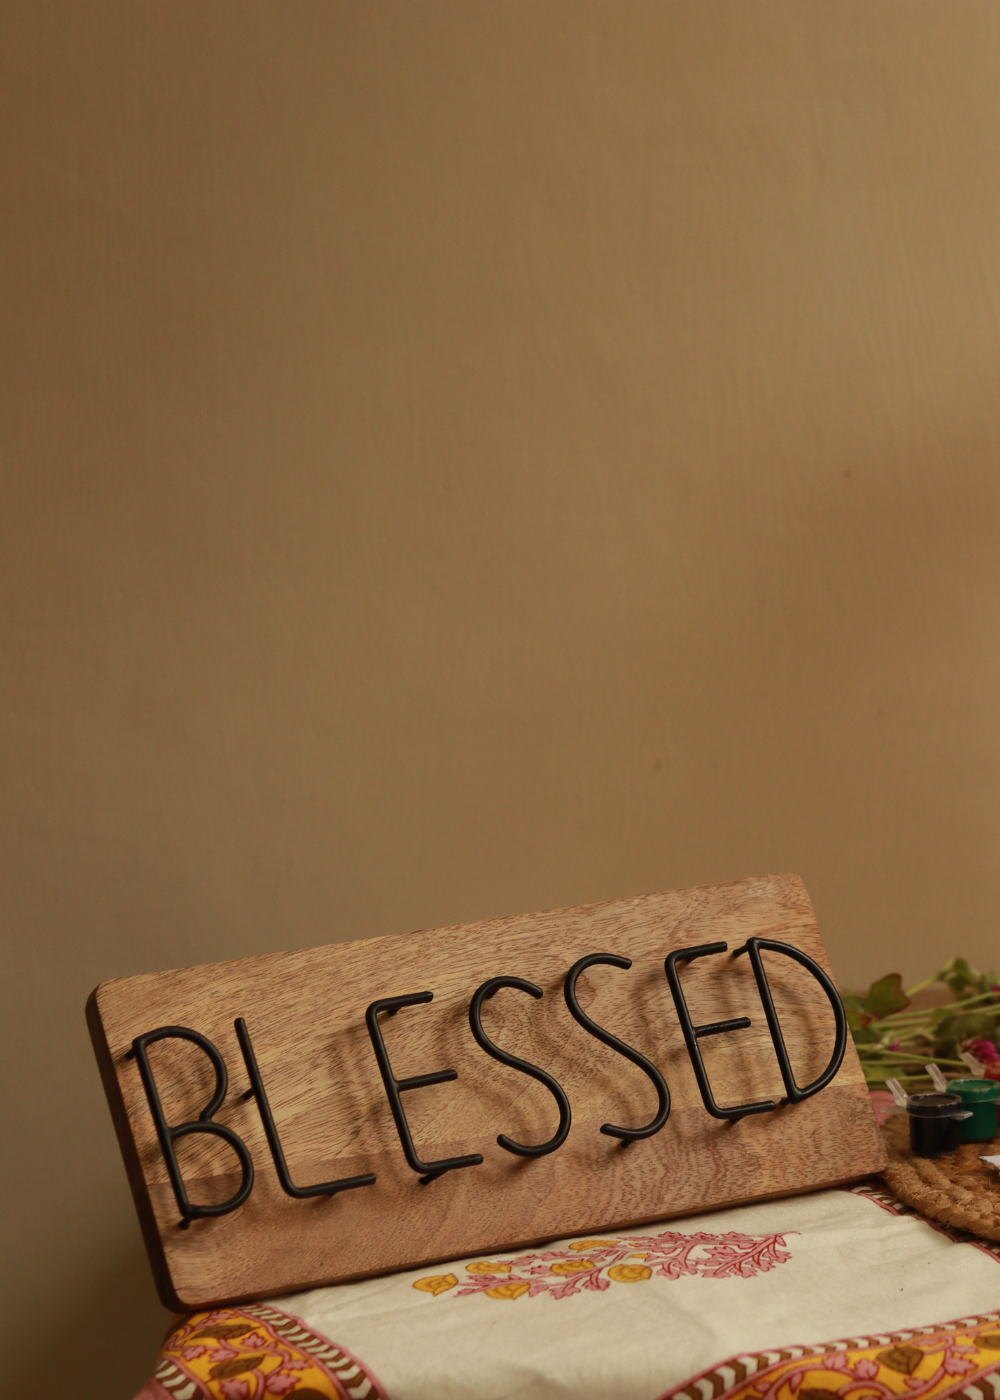 Blessed wooden board wall hanging